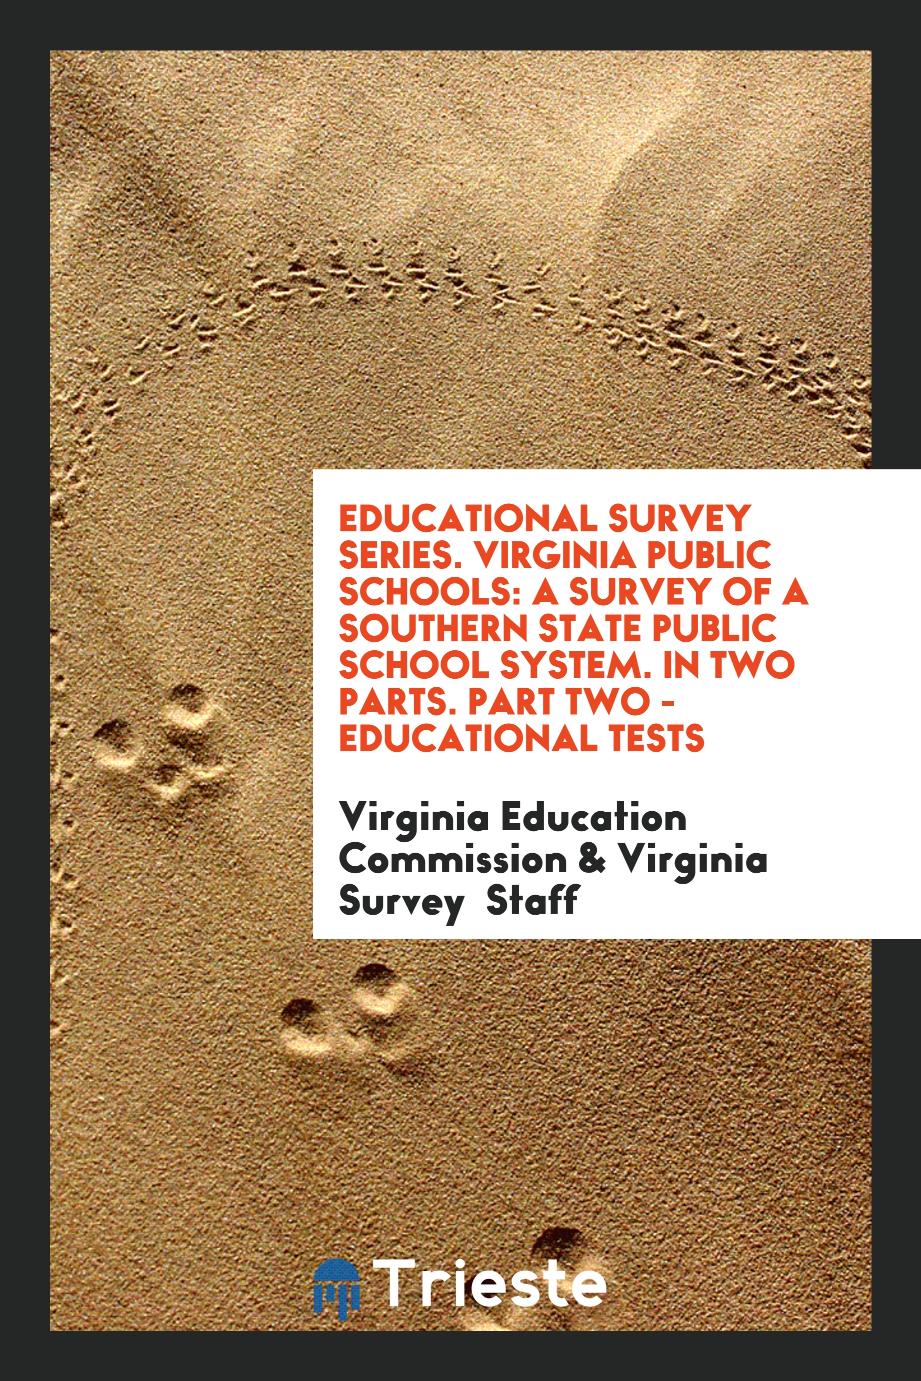 Educational Survey Series. Virginia Public Schools: A Survey of a Southern State Public School System. In Two Parts. Part Two - Educational Tests